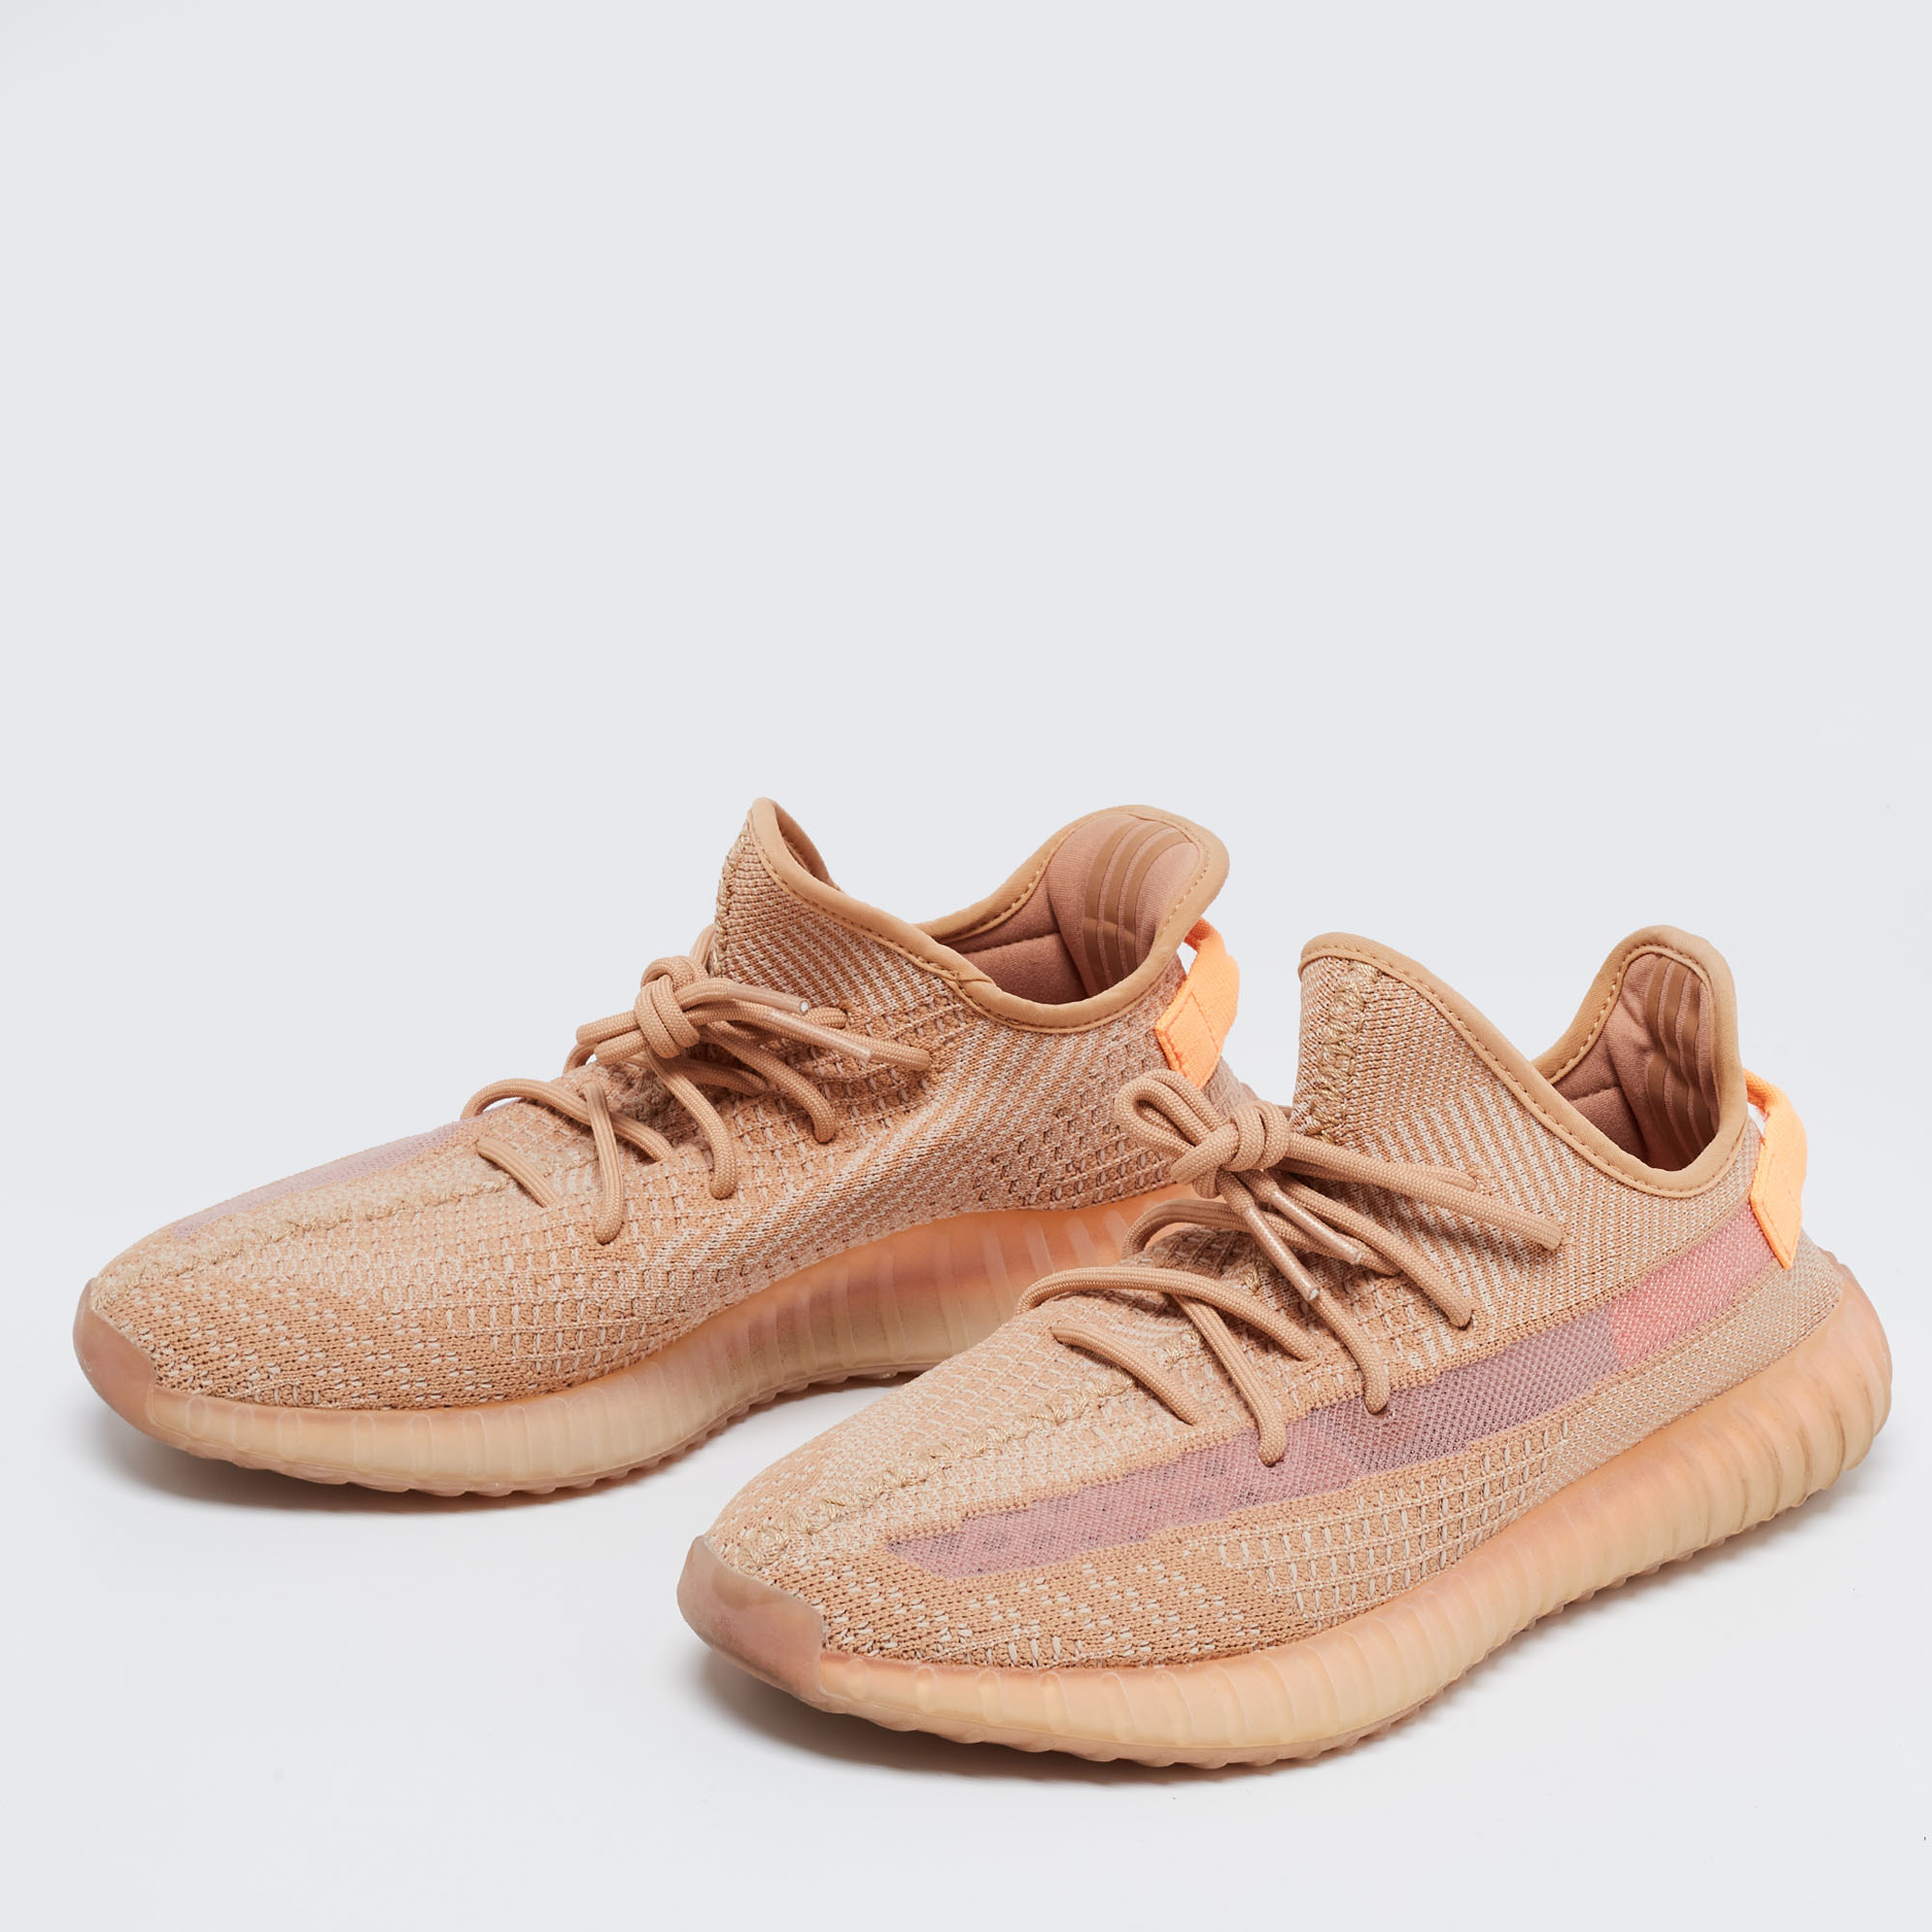 

Yeezy x Adidas Orange Knit Fabric Boost 350 V2 Clay Sneakers Size